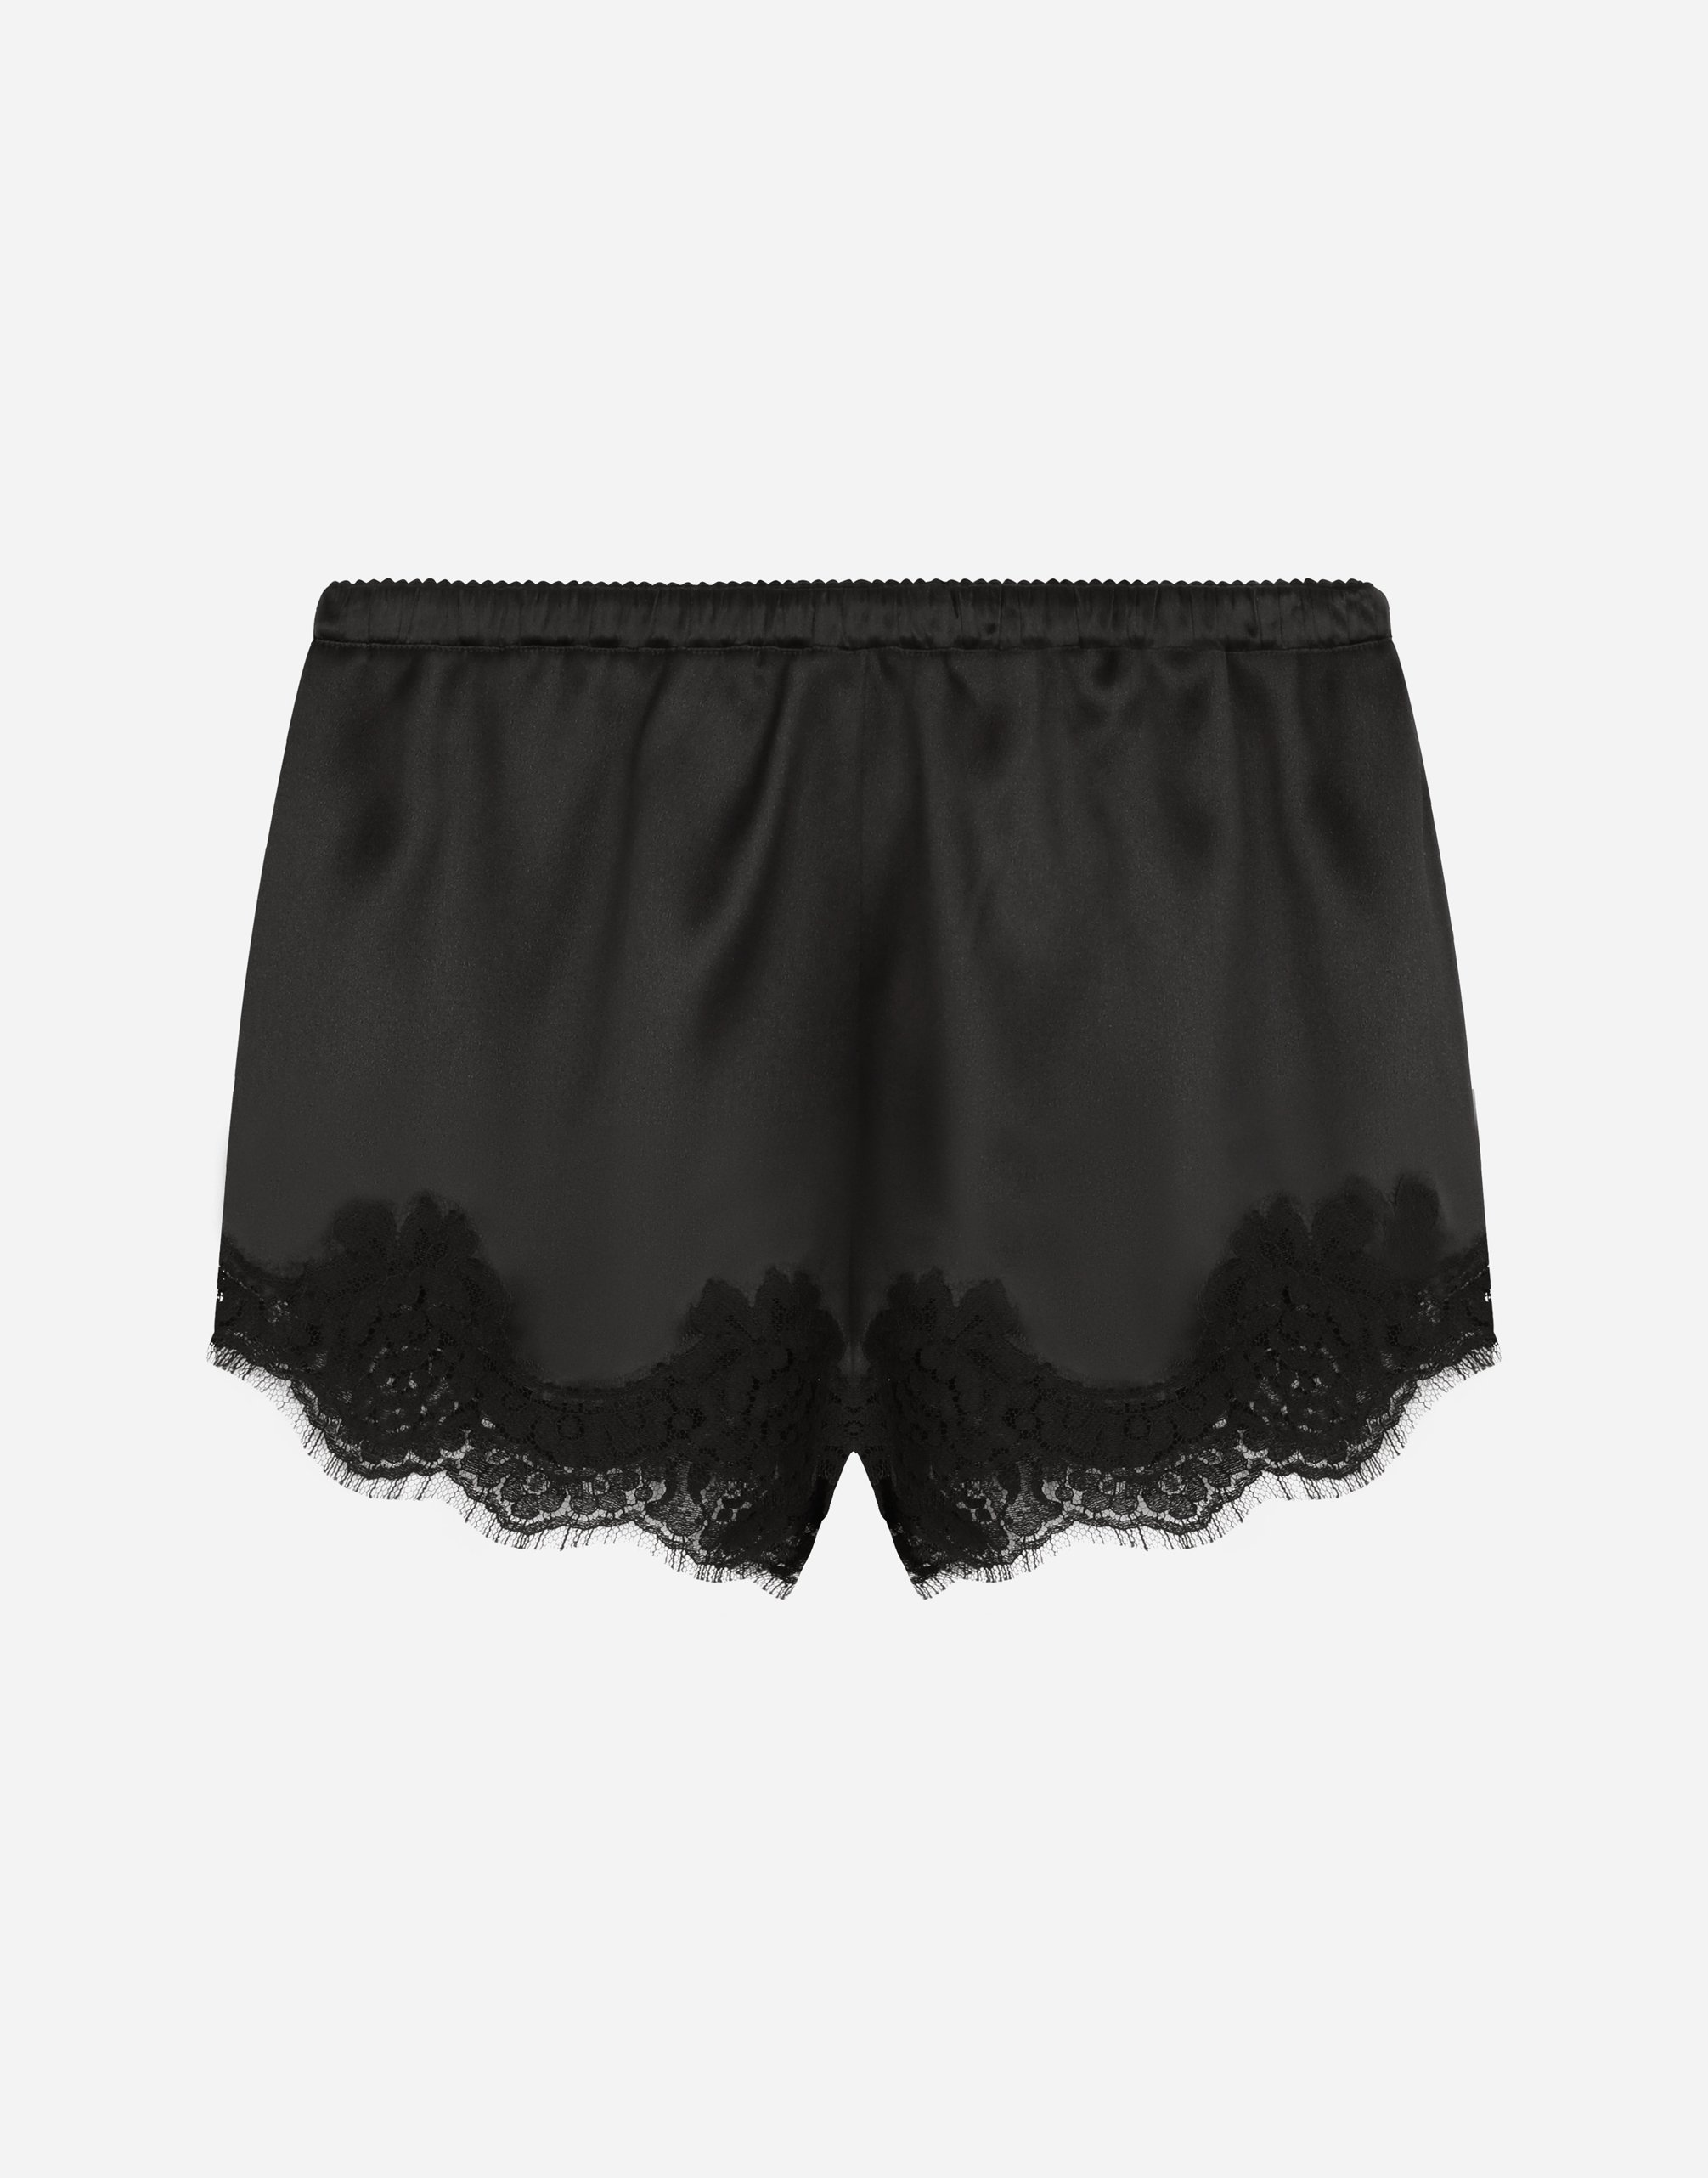 Satin lingerie shorts with lace detailing in Black